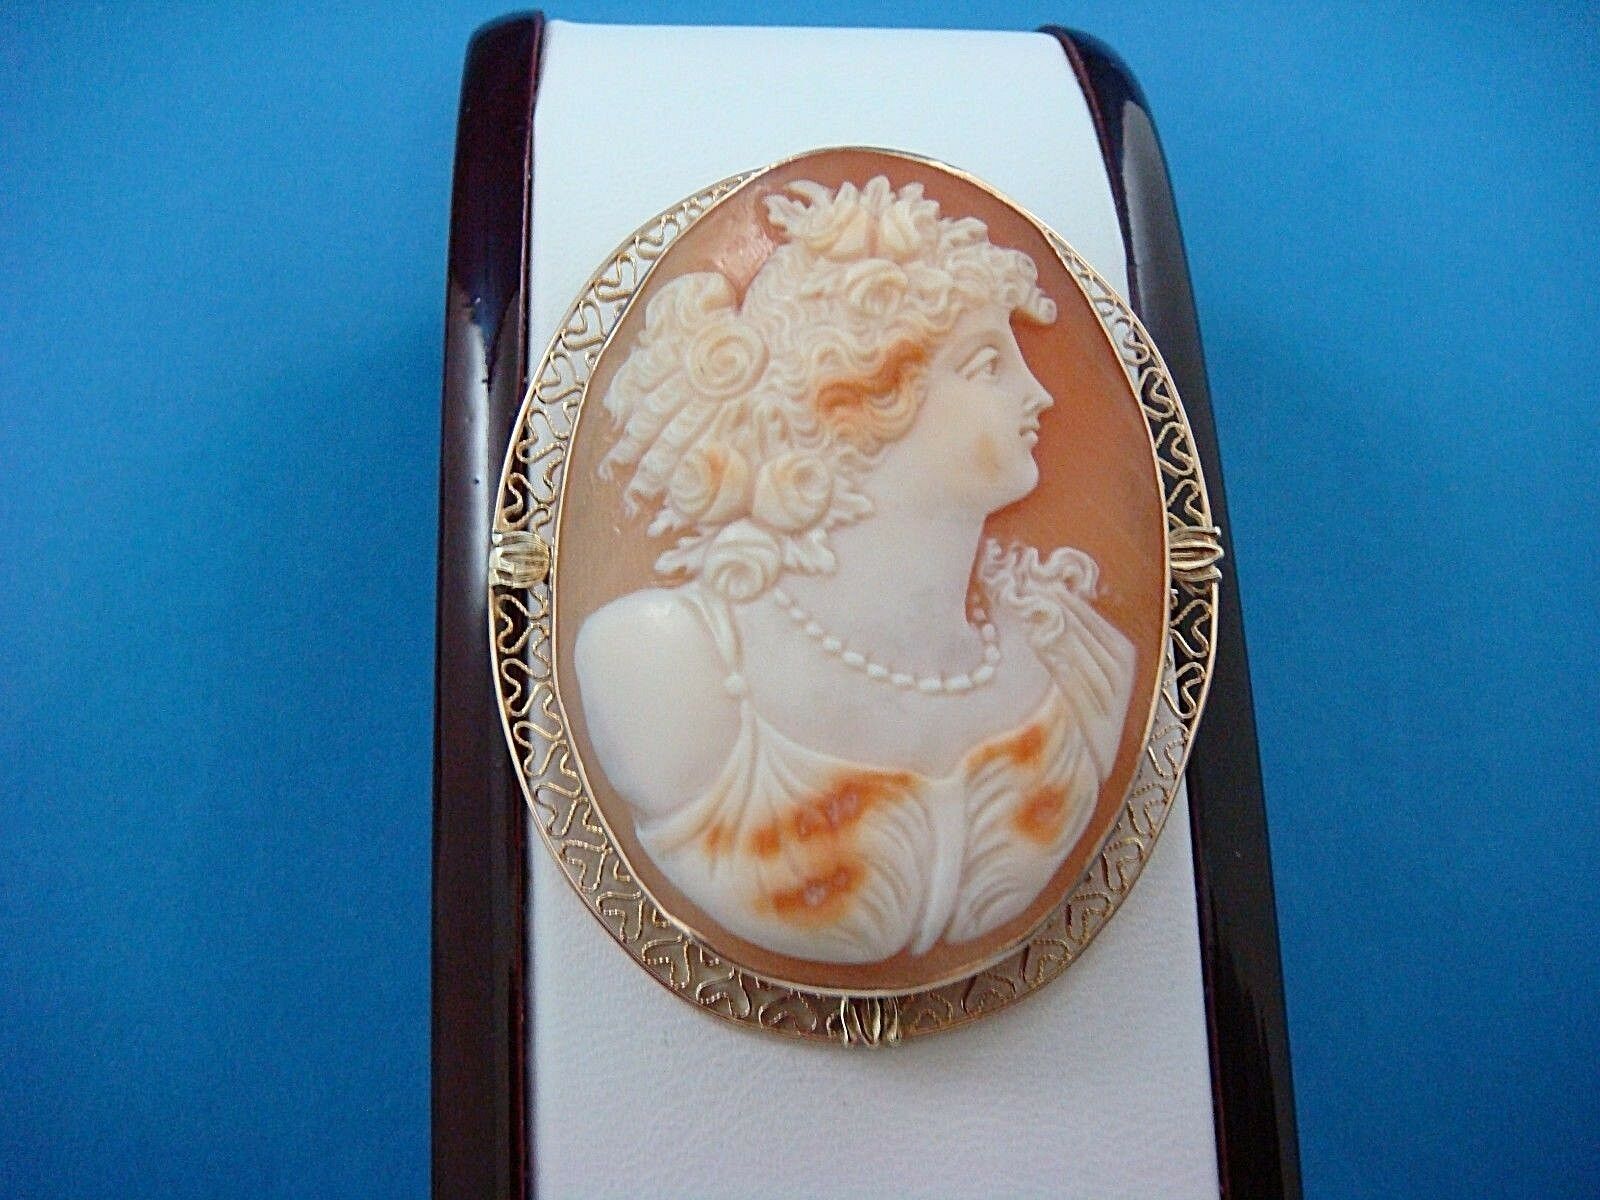 LARGE HANDCRAFTED ANTIQUE CAMEO BROOCH-PENDANT IN 14K YELLOW GOLD FILIGREE FRAME